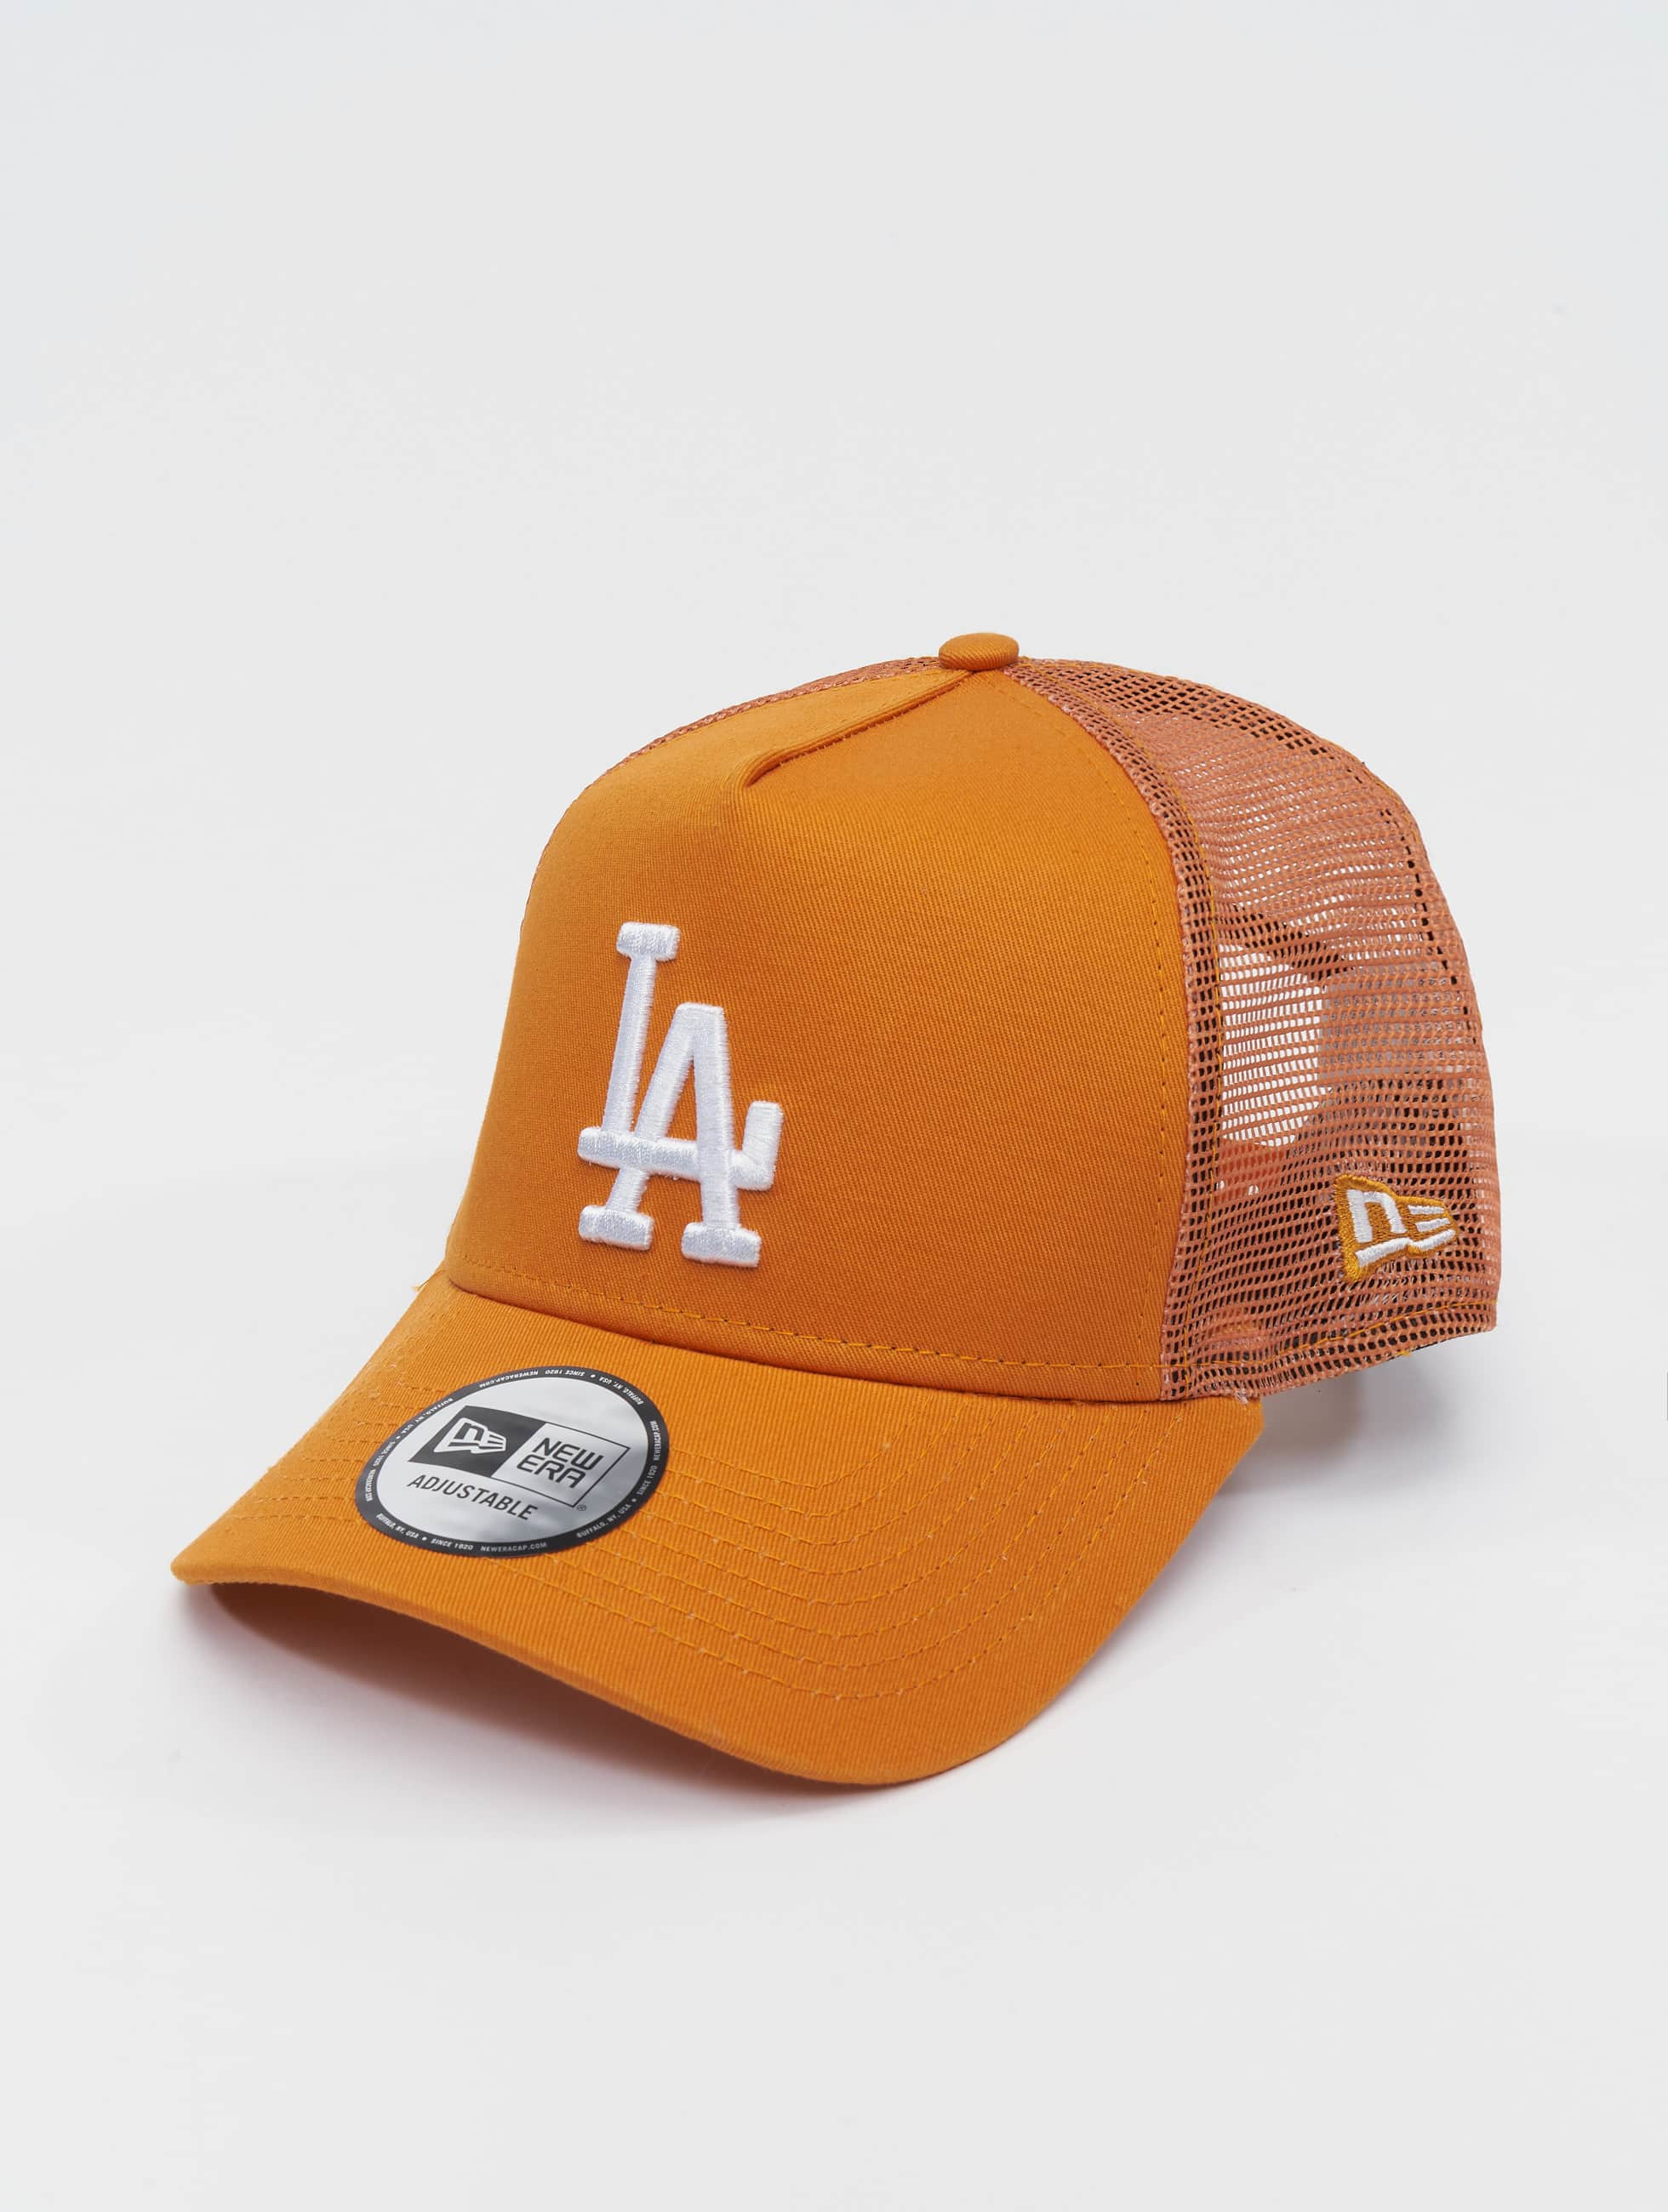 Trillen Componist Marco Polo New Era Cap / trucker cap MLB Los Angeles Dodgers League Essential 9Forty  AF in oranje 906093